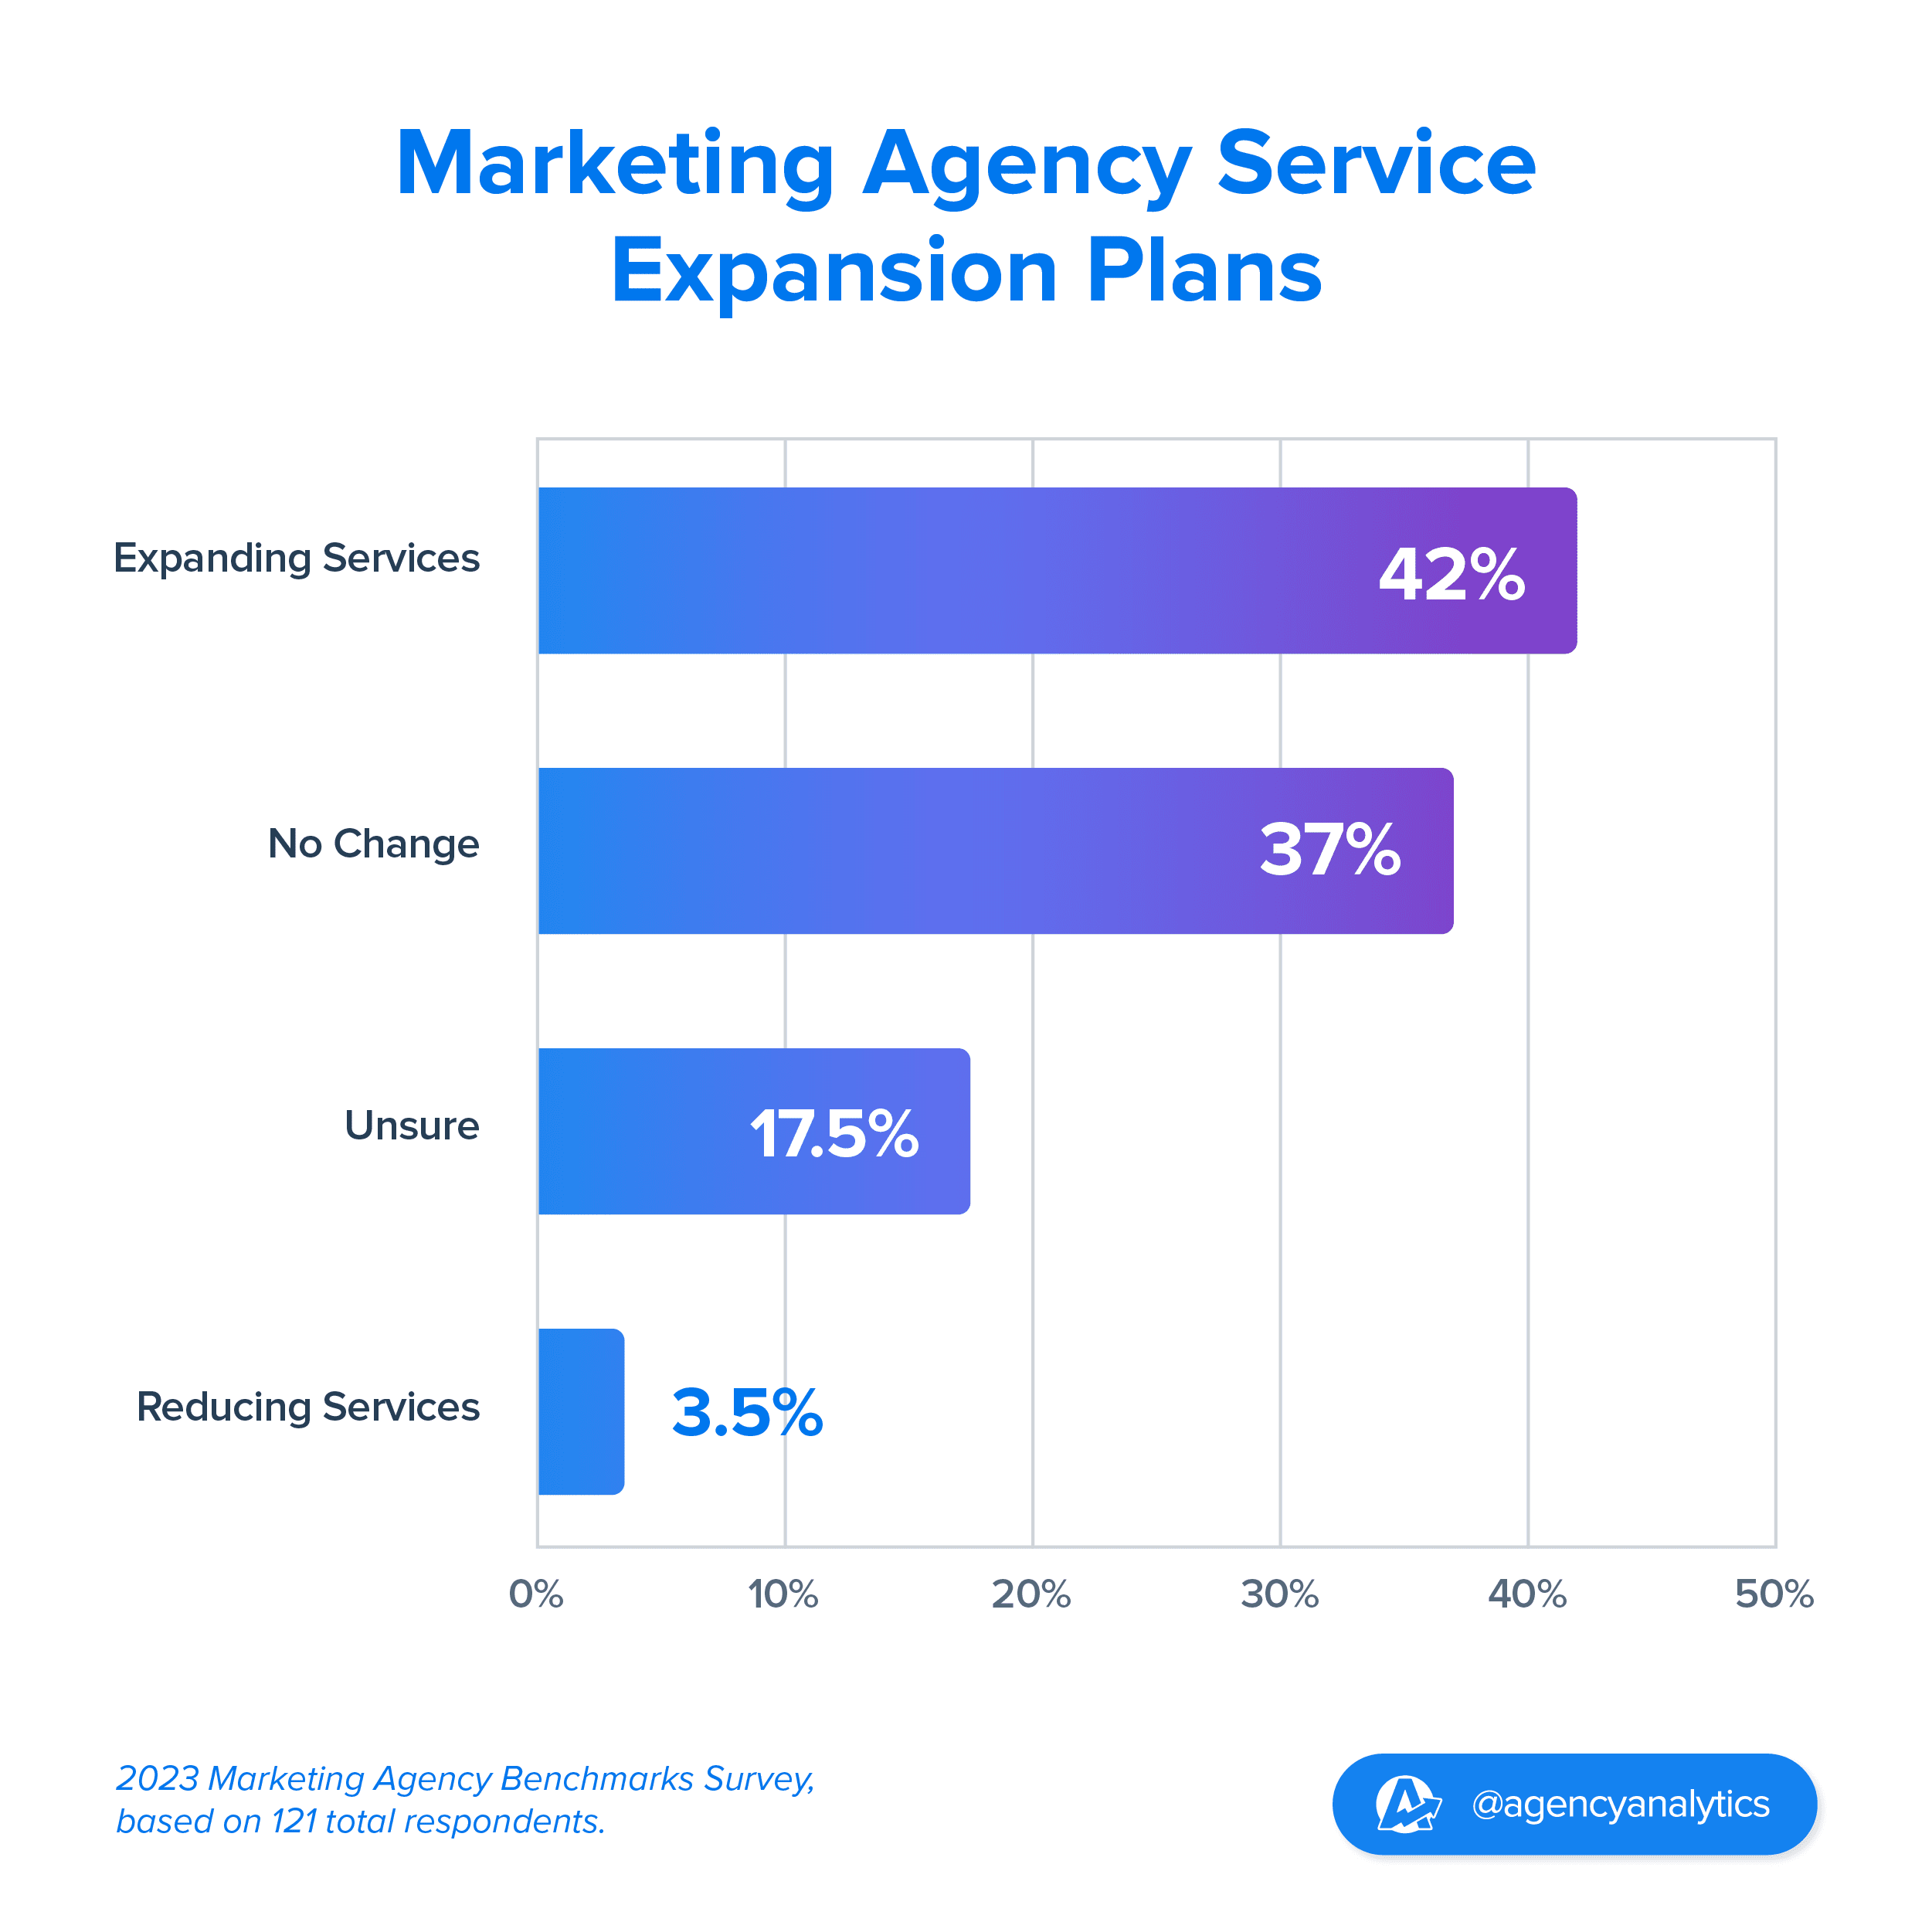 Graph showing marketing agency expansion plans for 2023